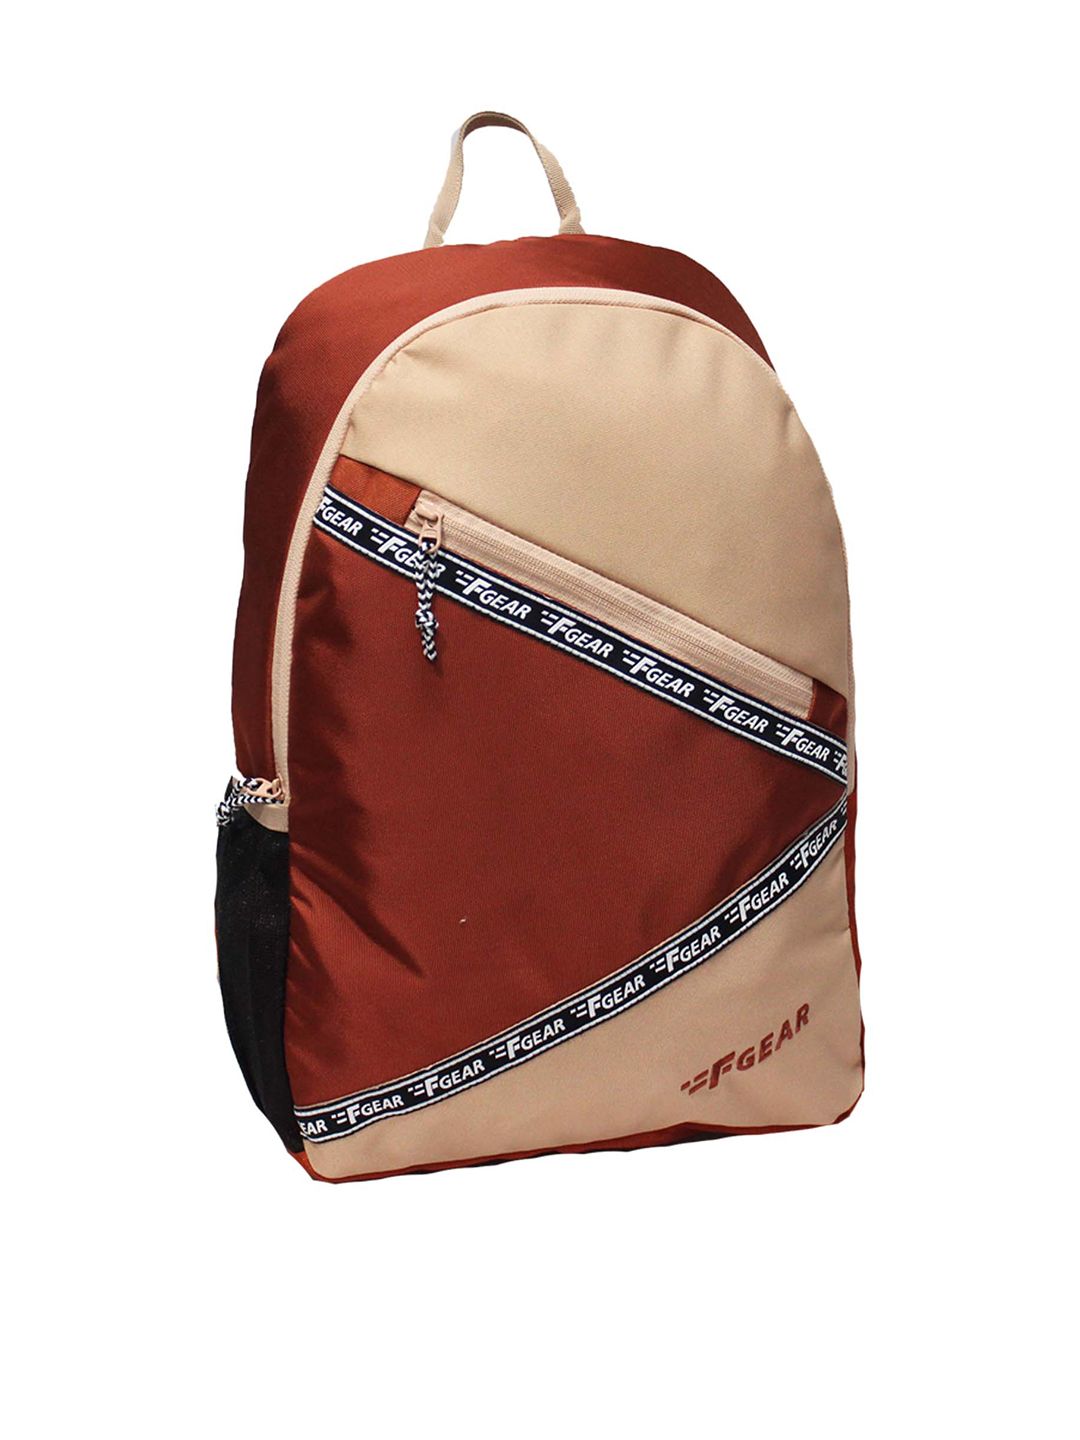 F Gear Unisex Red & Beige Colourblocked Backpack Price in India